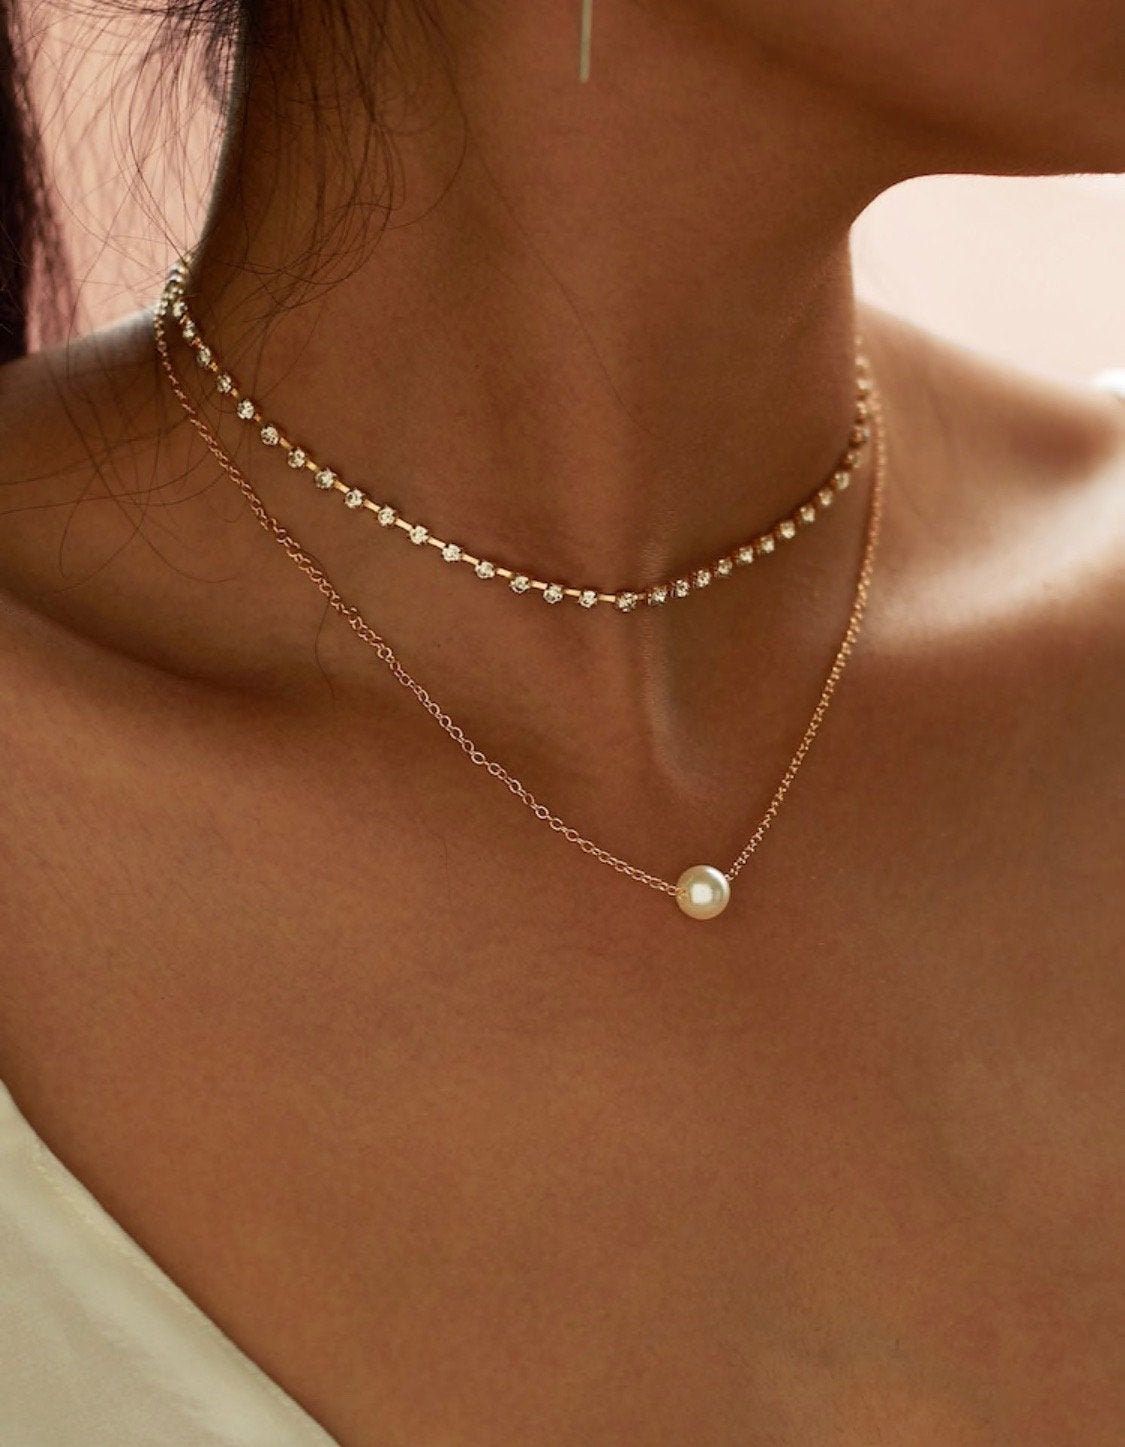 Get a Nice Look of Neck with Freshwater Pearl Necklace